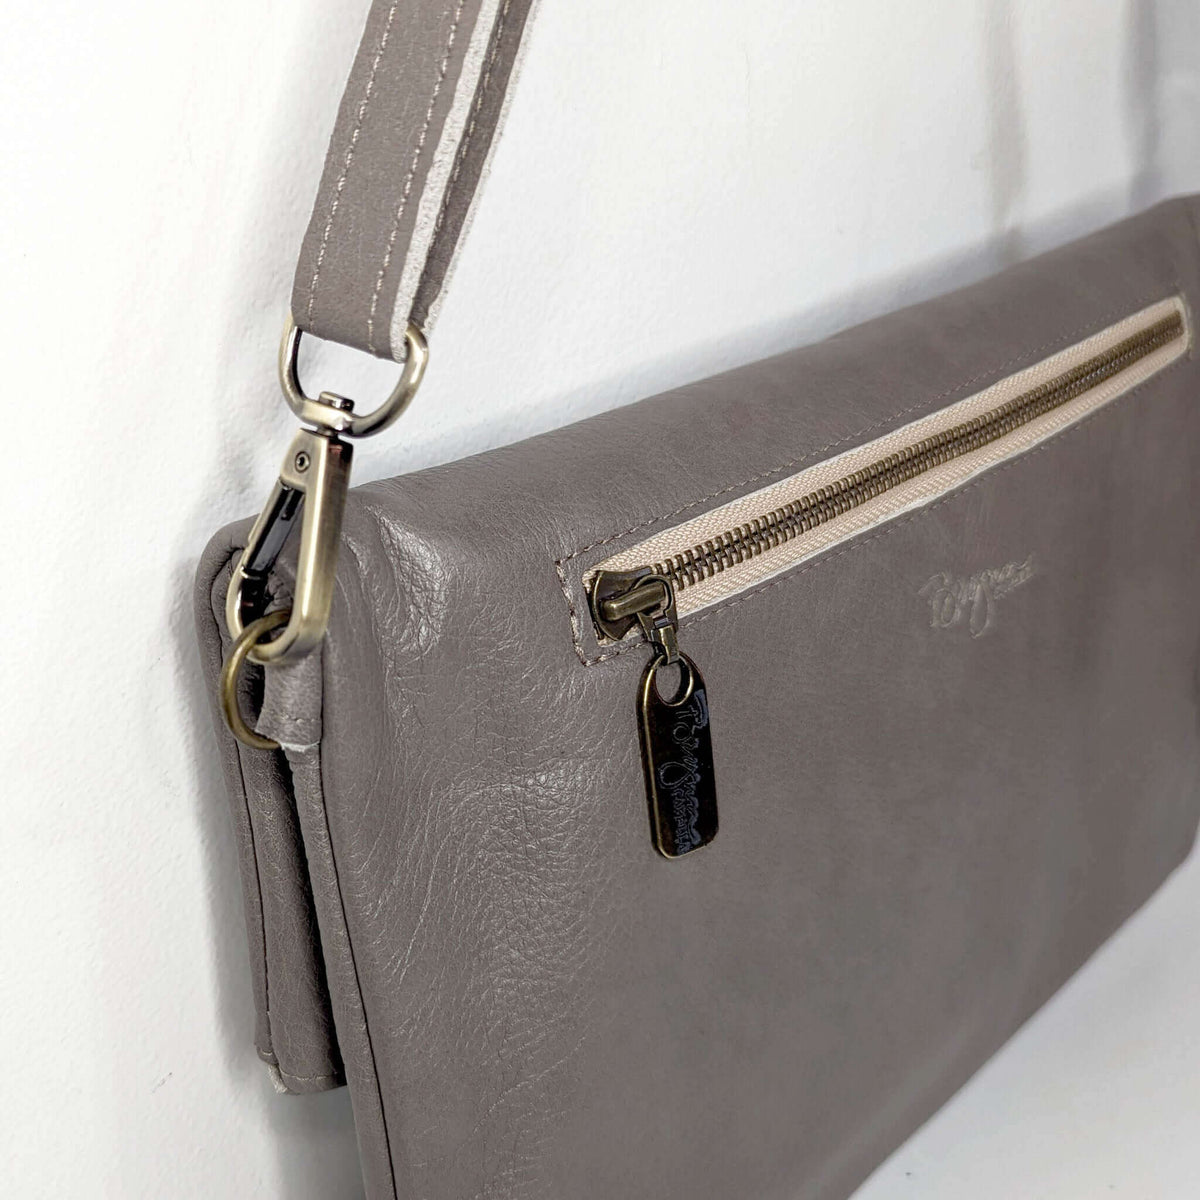 Lakeland Leather Fairfield Leather Cross Body Bag in Grey One Size